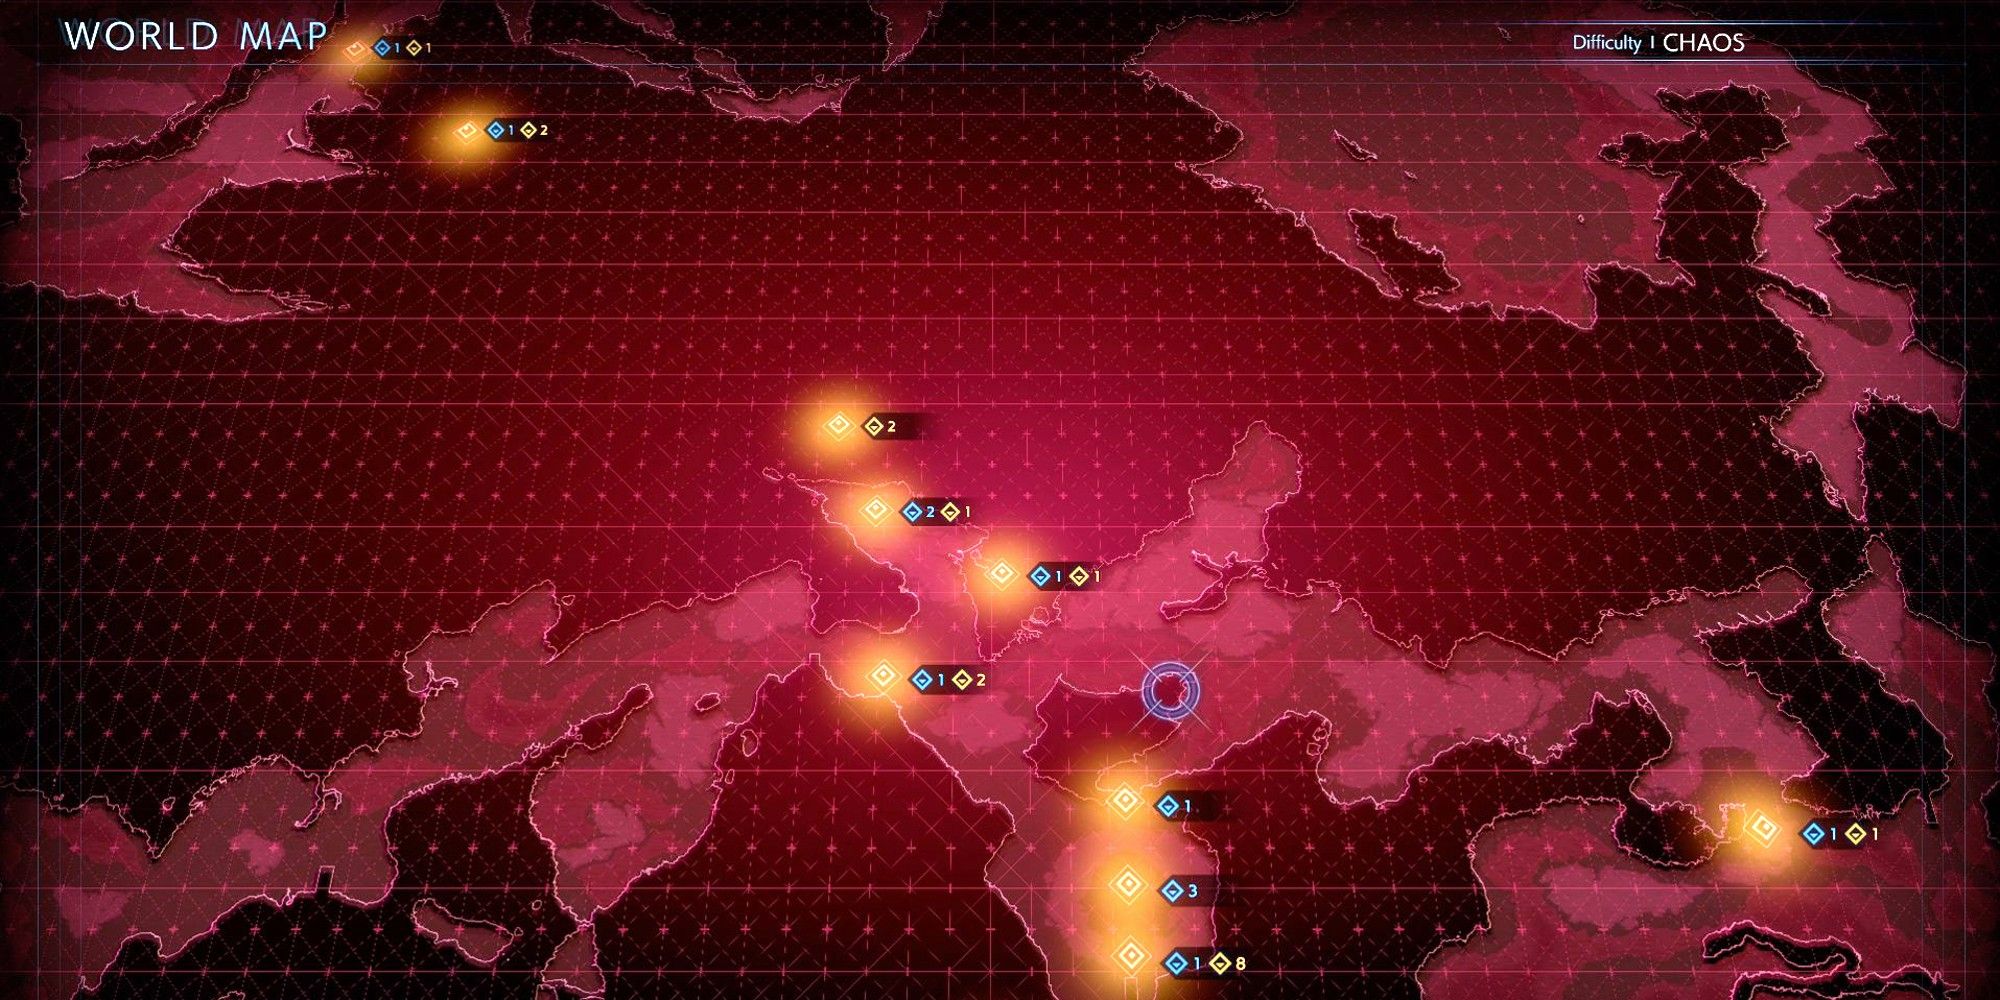 SOP Chaos Difficulty spreads all over the world map once you beat the story